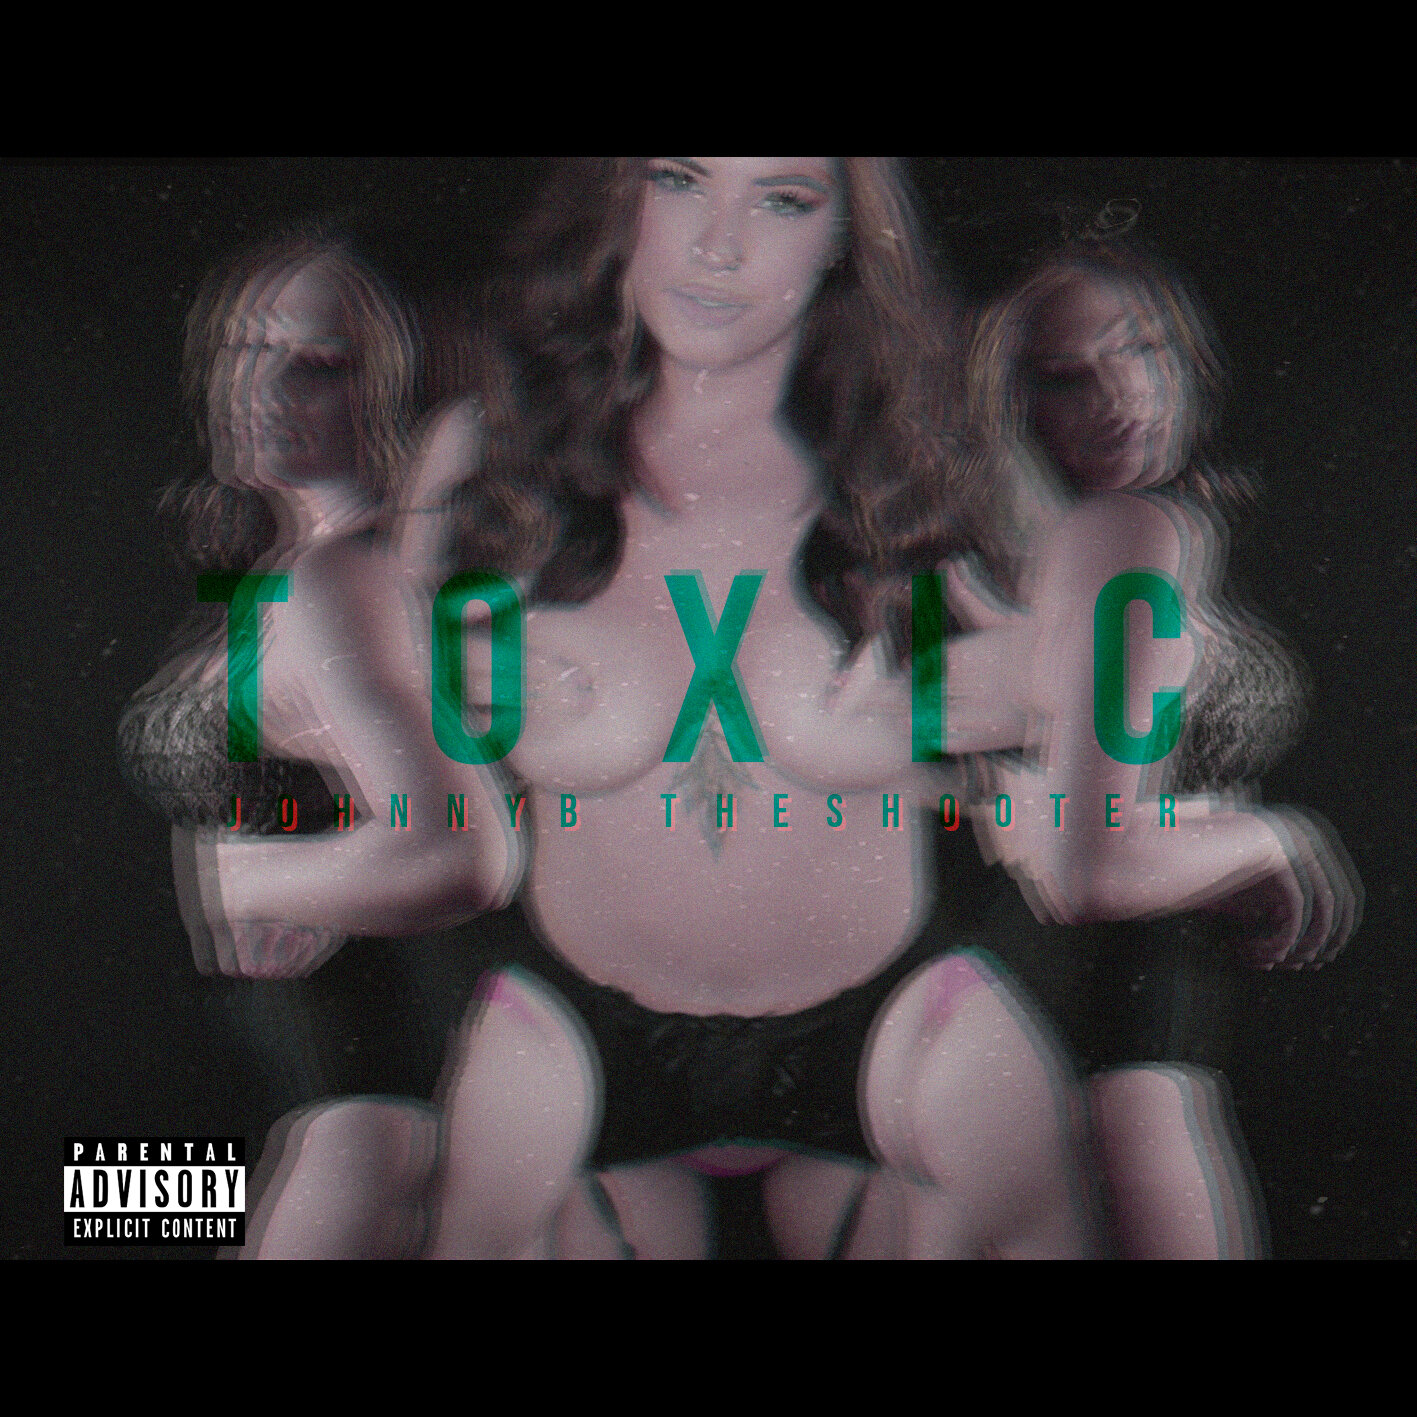 TOXIC - JohnnyB theShooter COVER.jpg